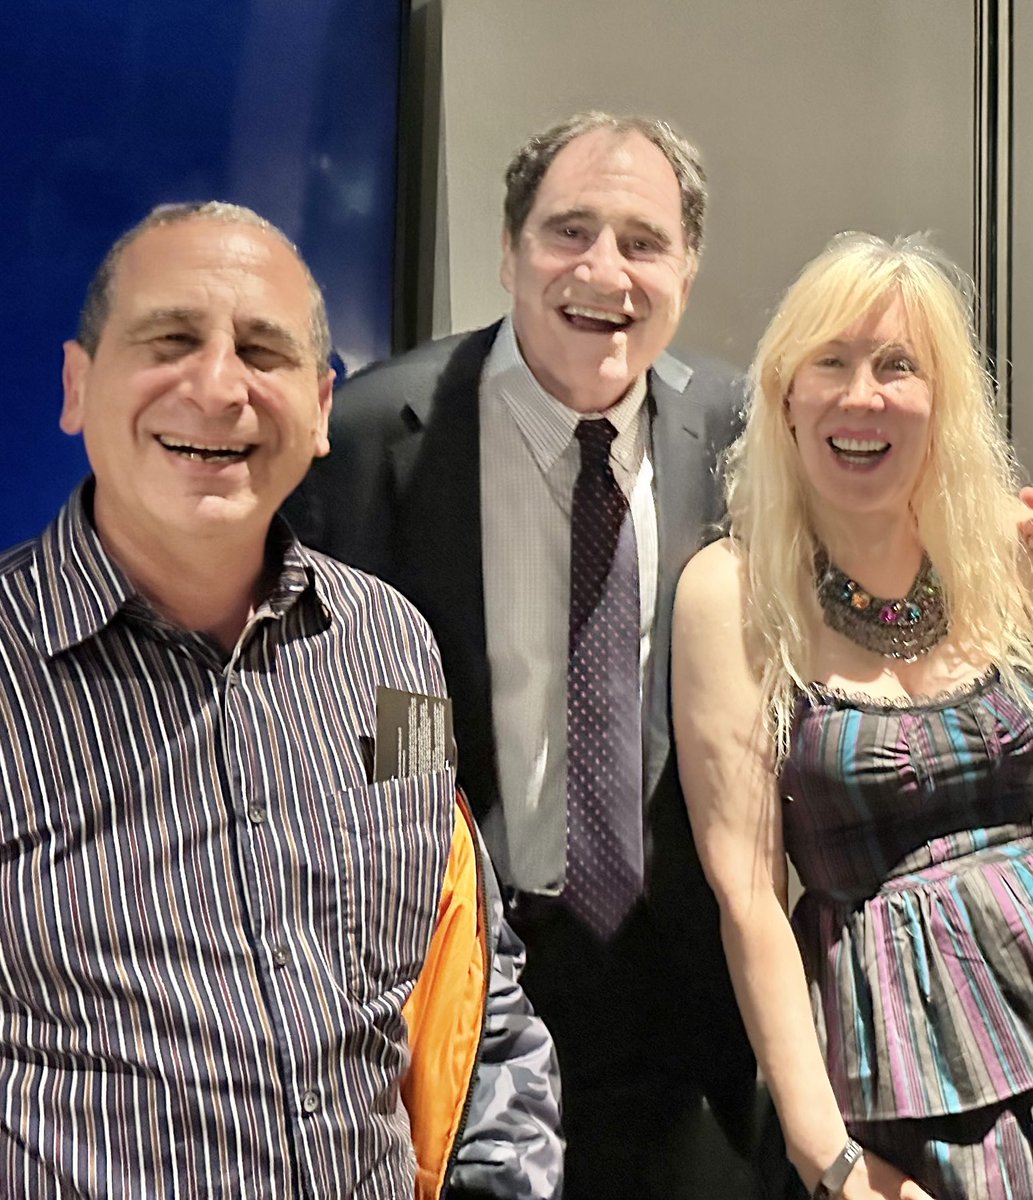 It is worth getting into show business just so you get to know Richard Kind